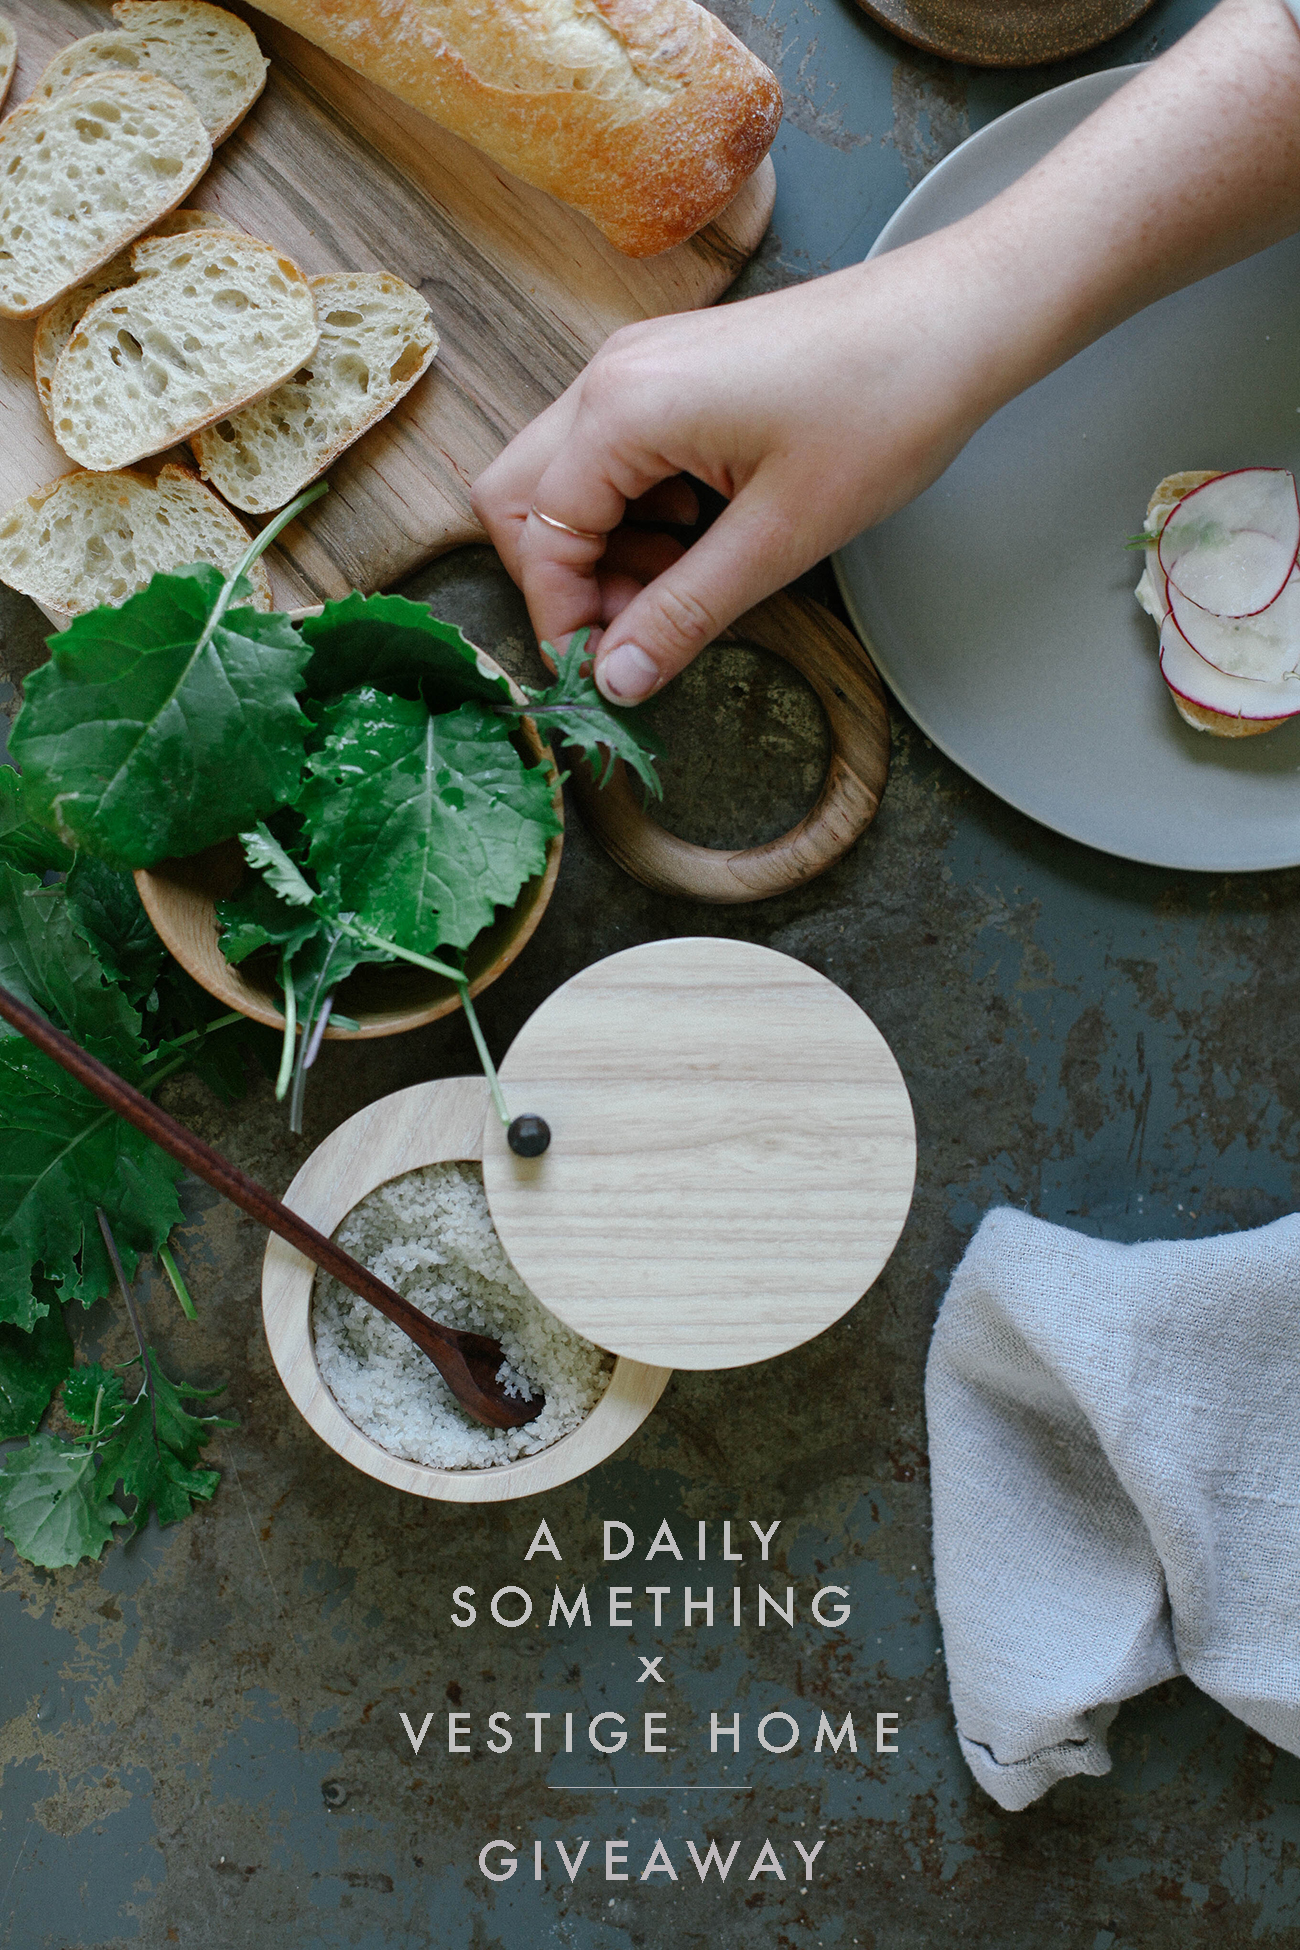 A Daily Something x Vestige Home